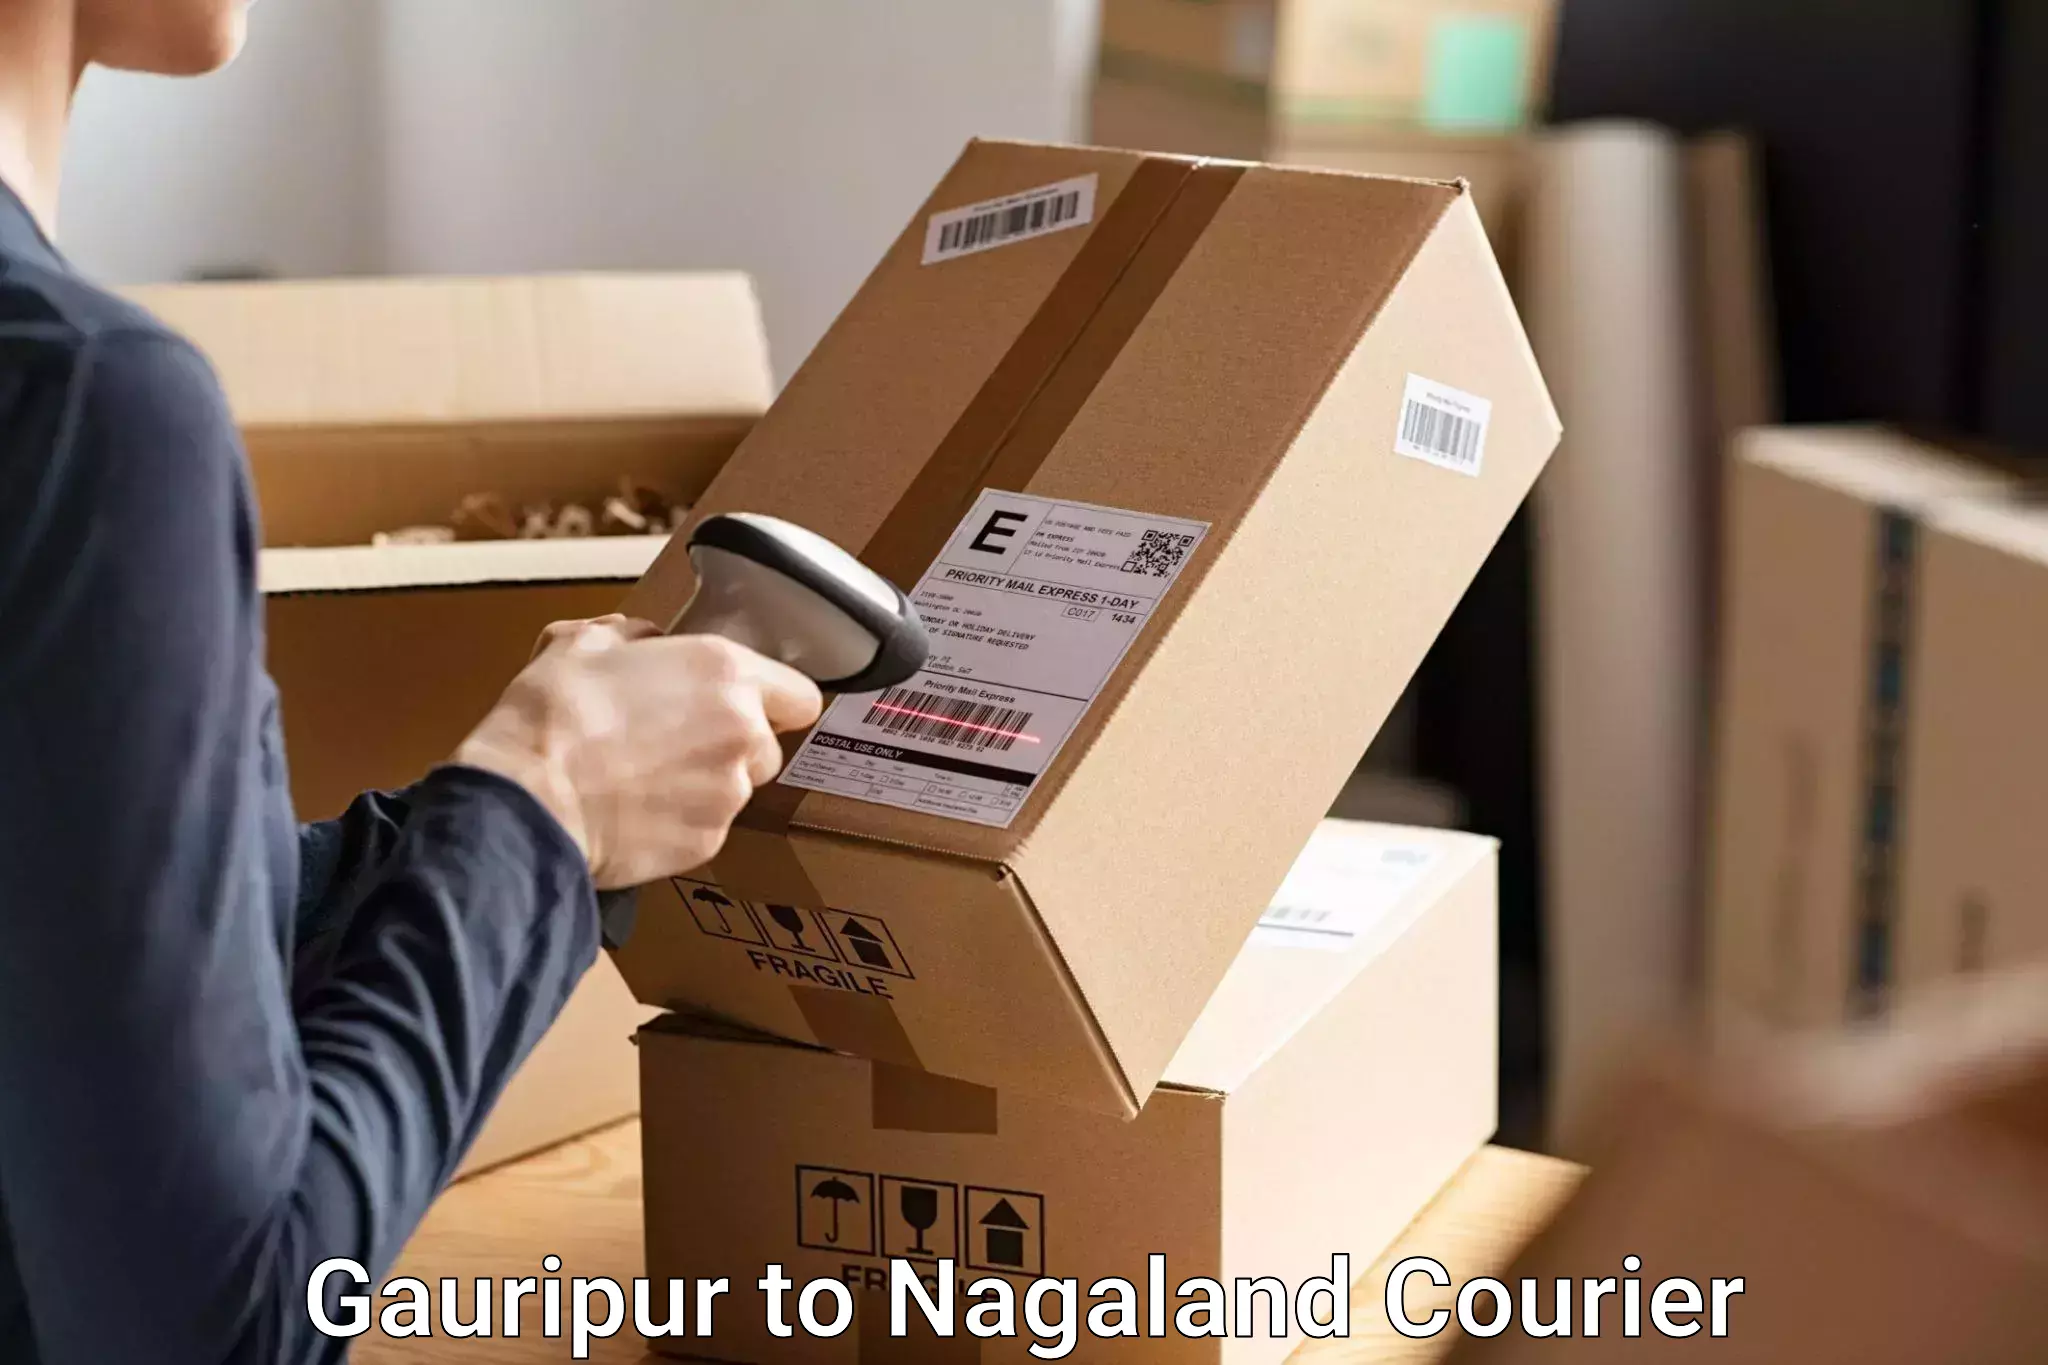 Same day baggage transport in Gauripur to Nagaland